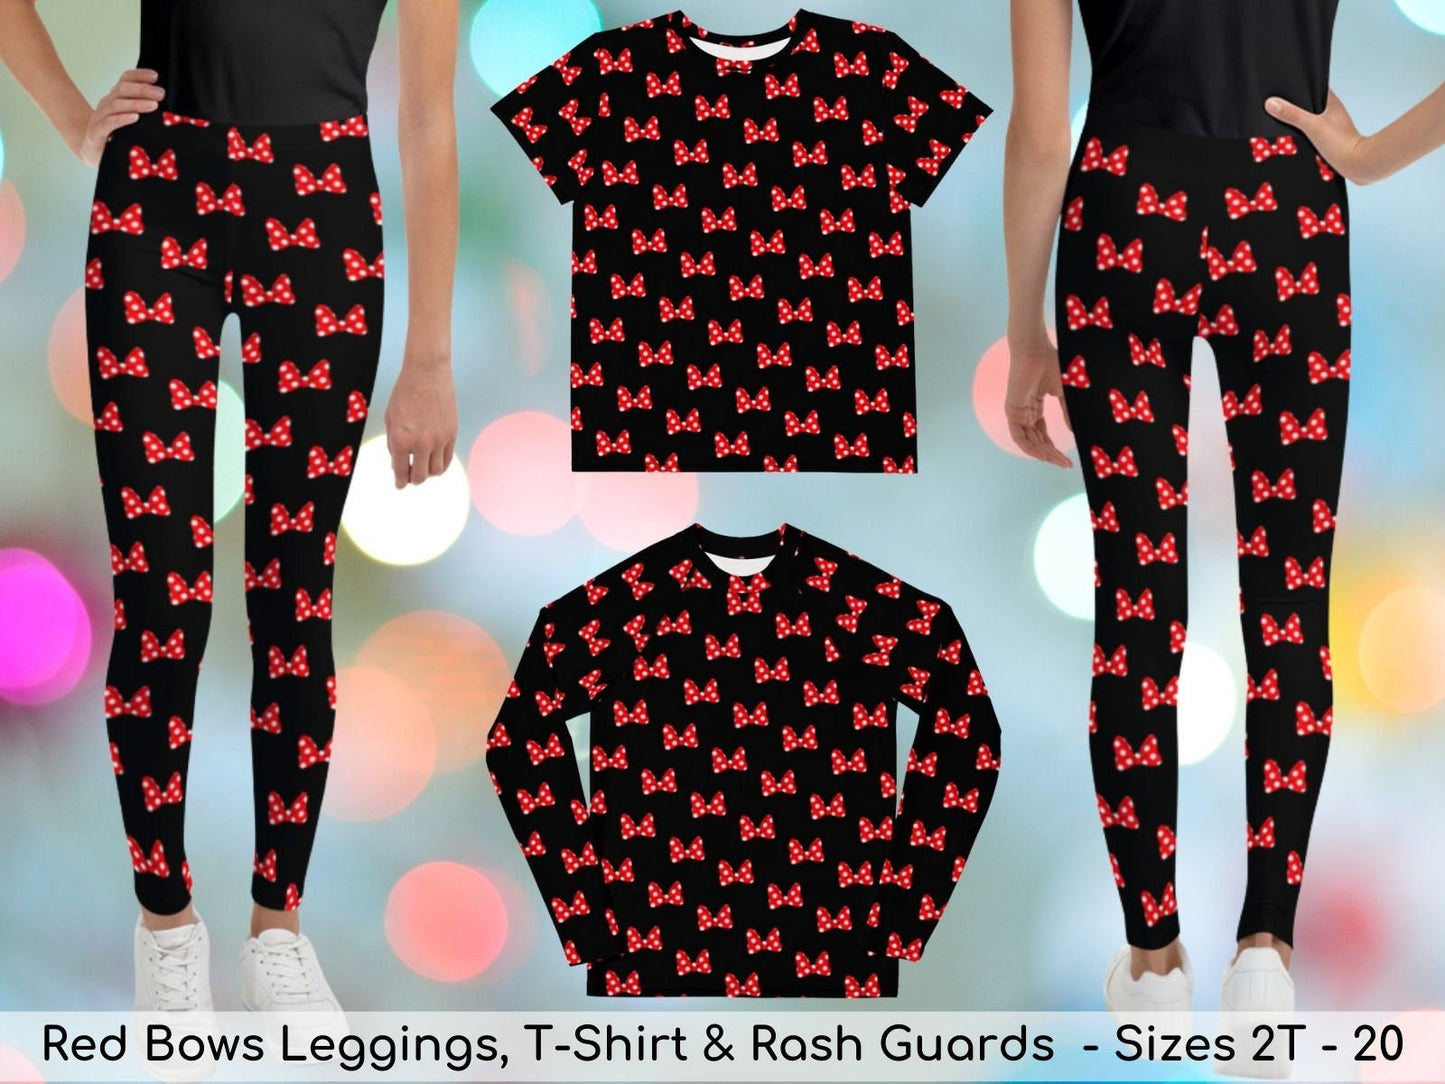 Minnie Inspired Leggings, Red Bows, Toddlers, Kids & Youth Leggings, Yoga Pants, Rash Guards, T-Shirts, Cosplay Costume, Halloween costume